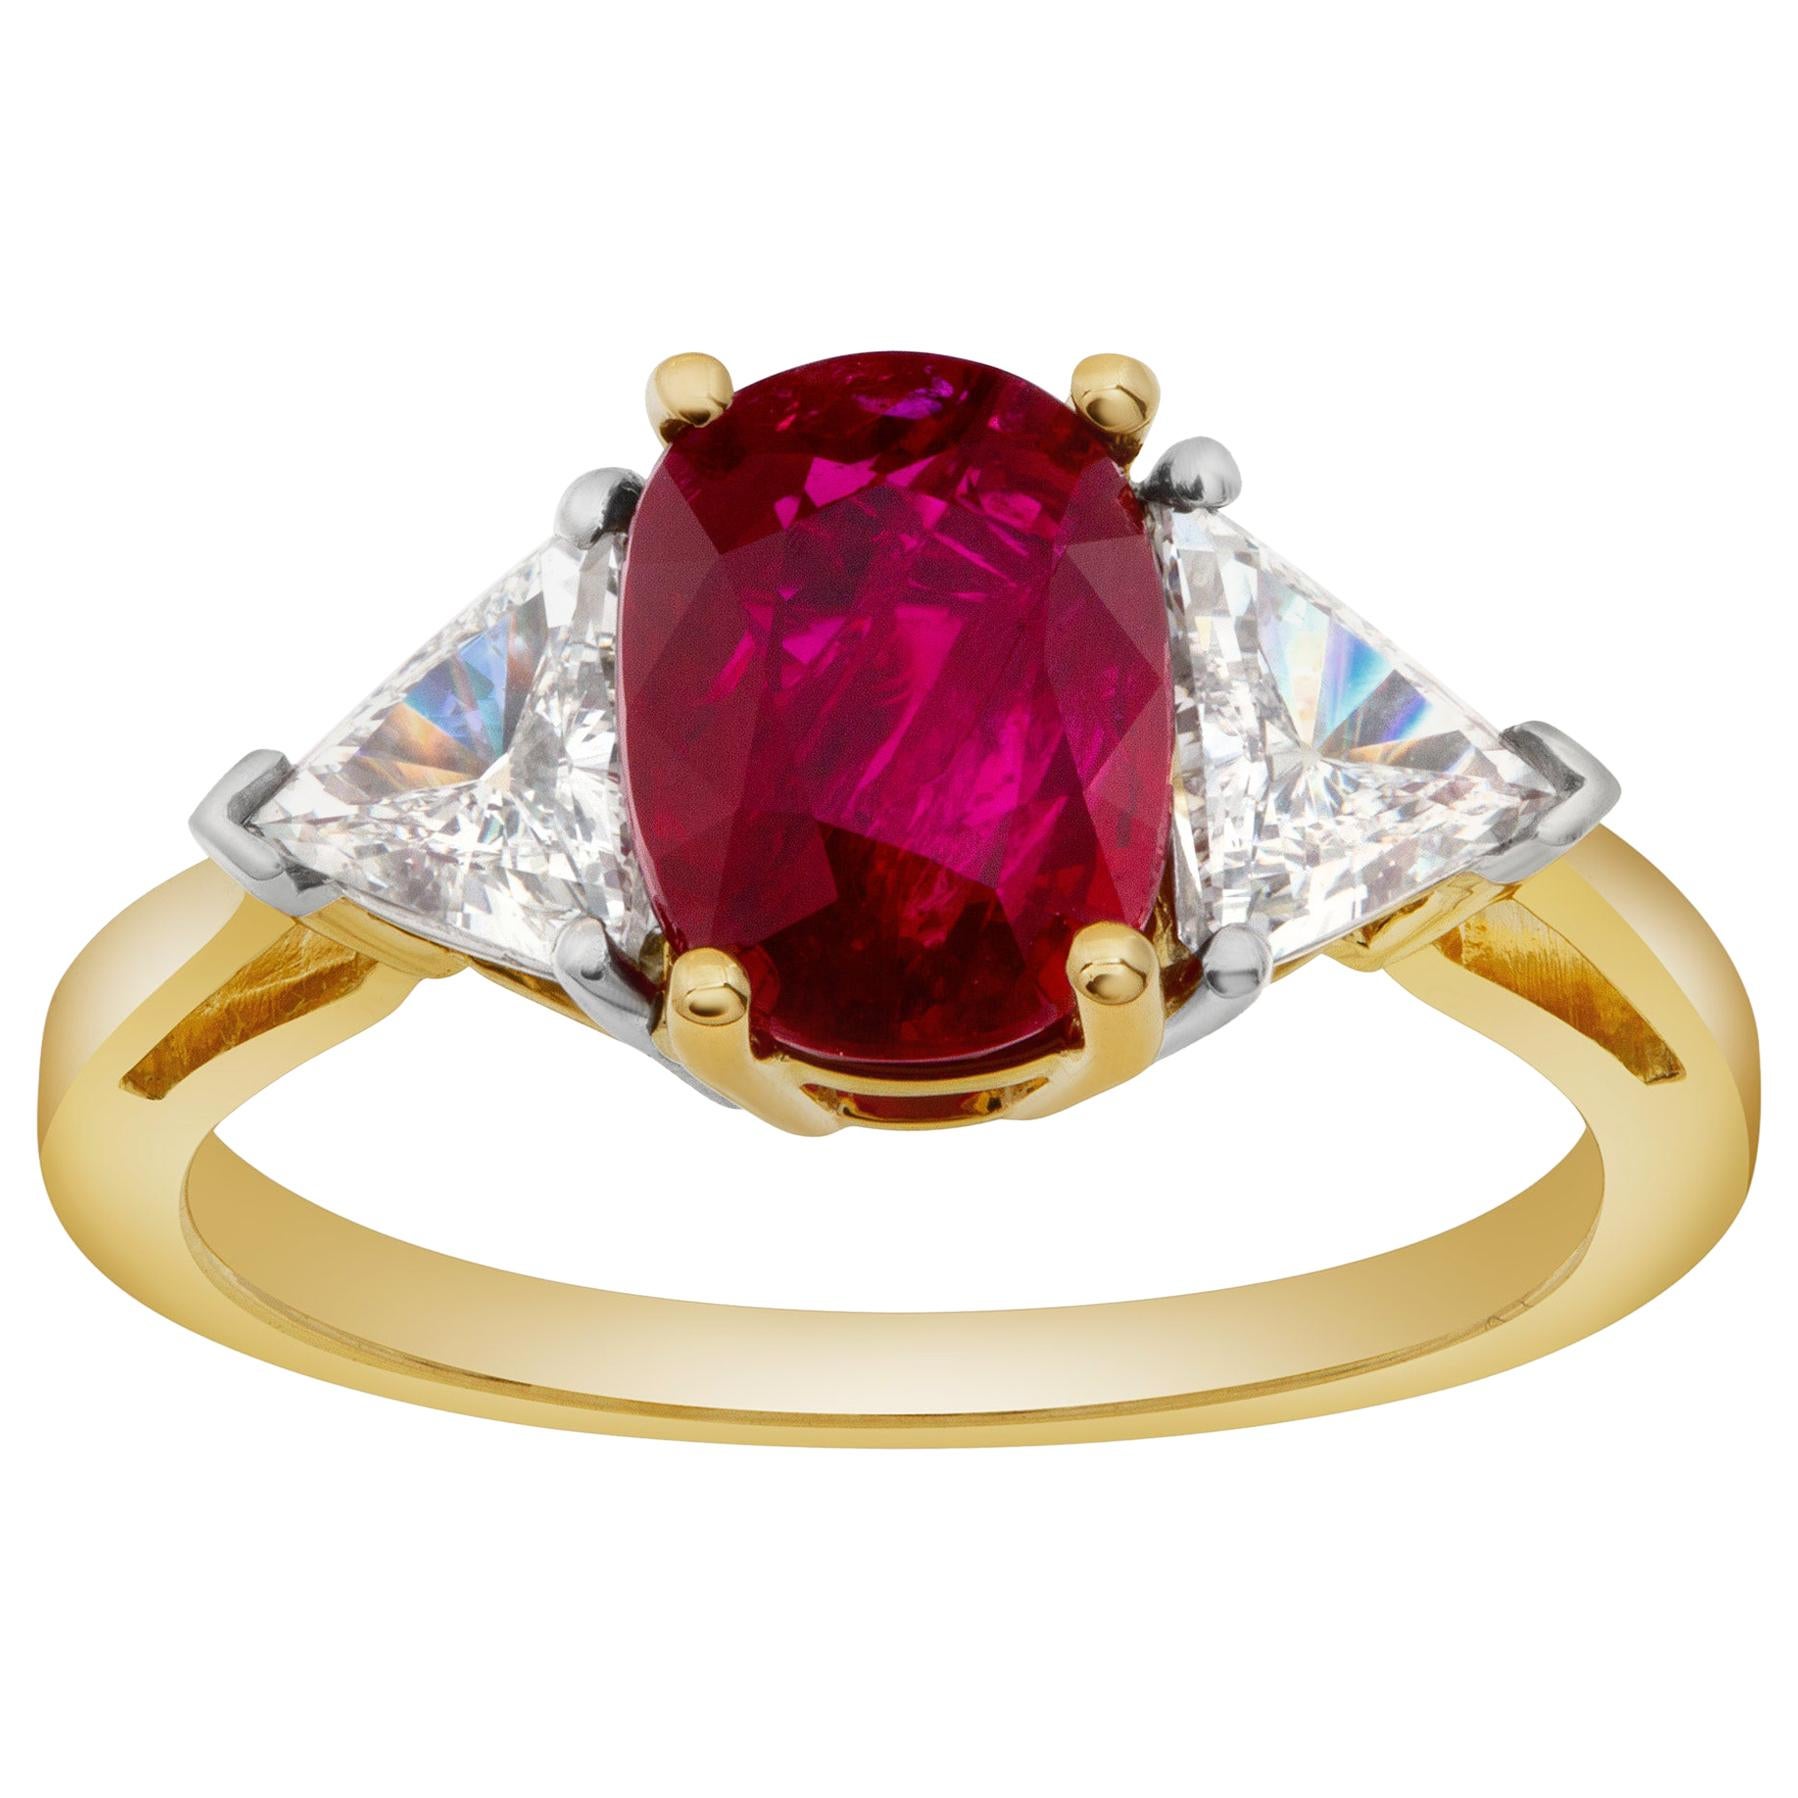 Ruby and Diamond Ring in Platinum and 18 Karat Yellow Gold